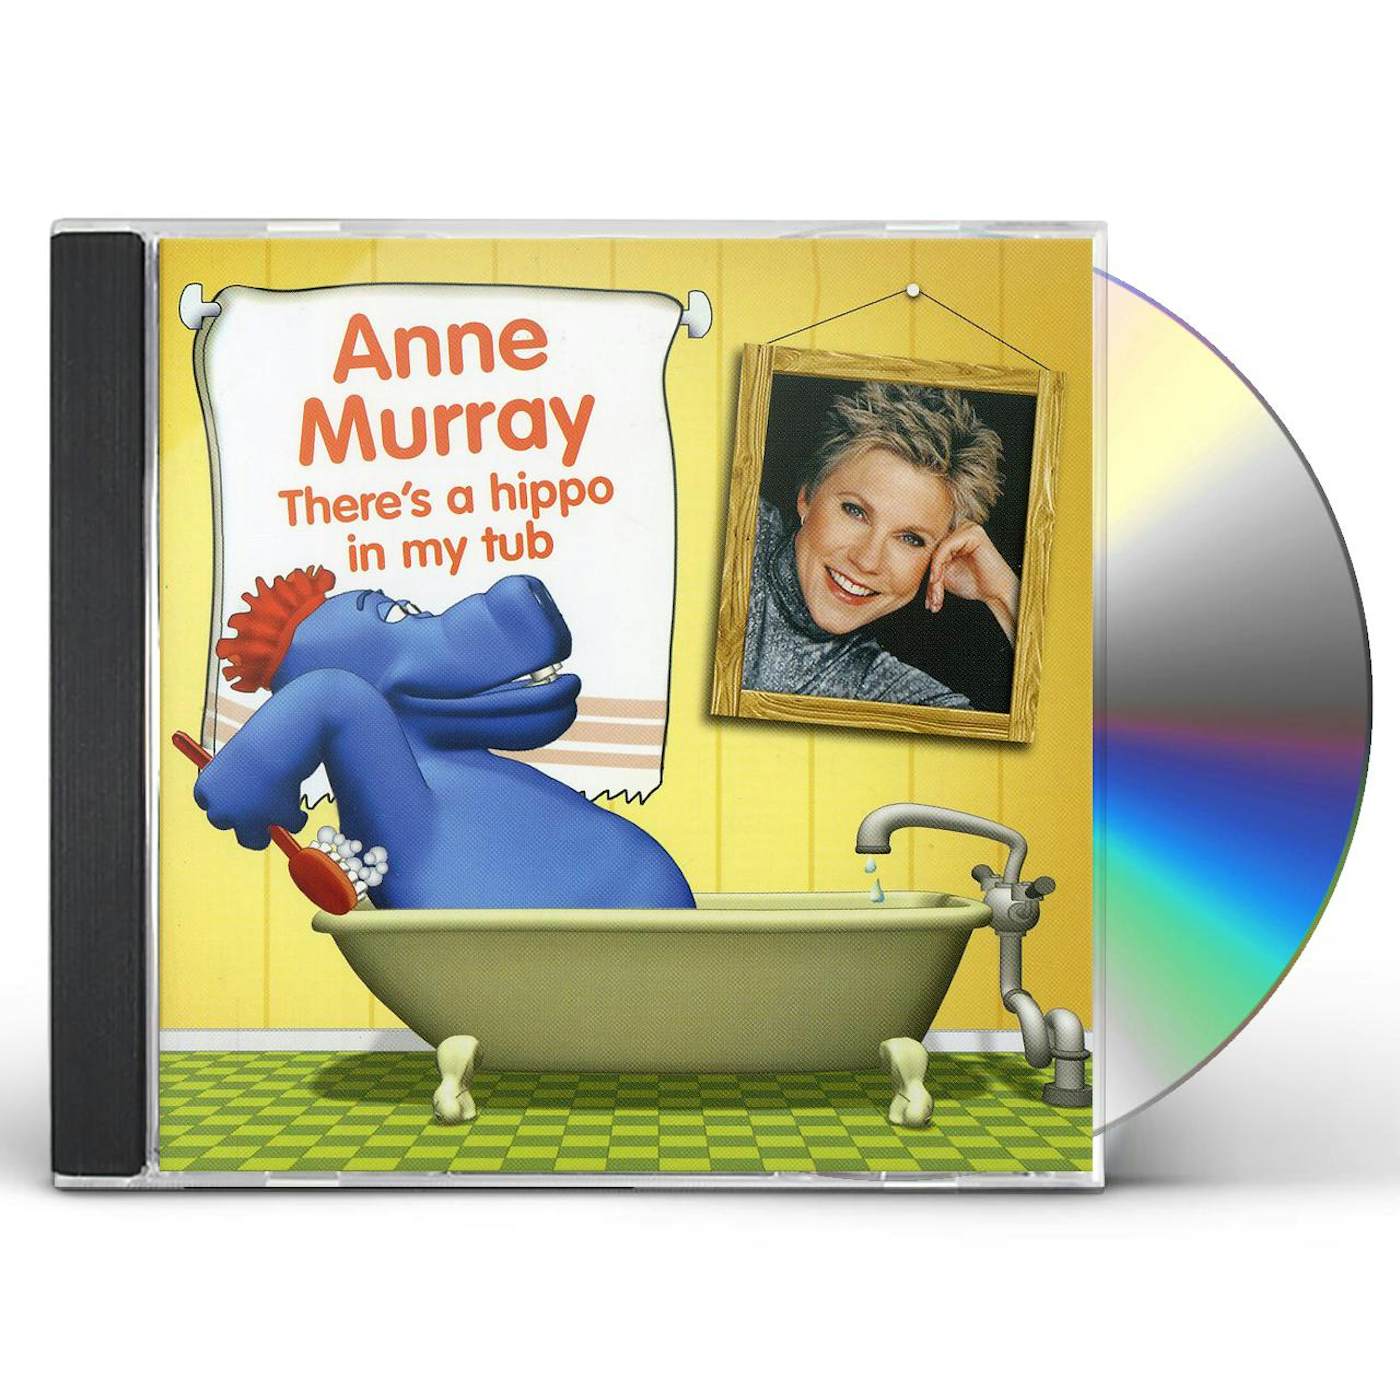 Anne Murray THERE'S A HIPPO IN MY TUB CD